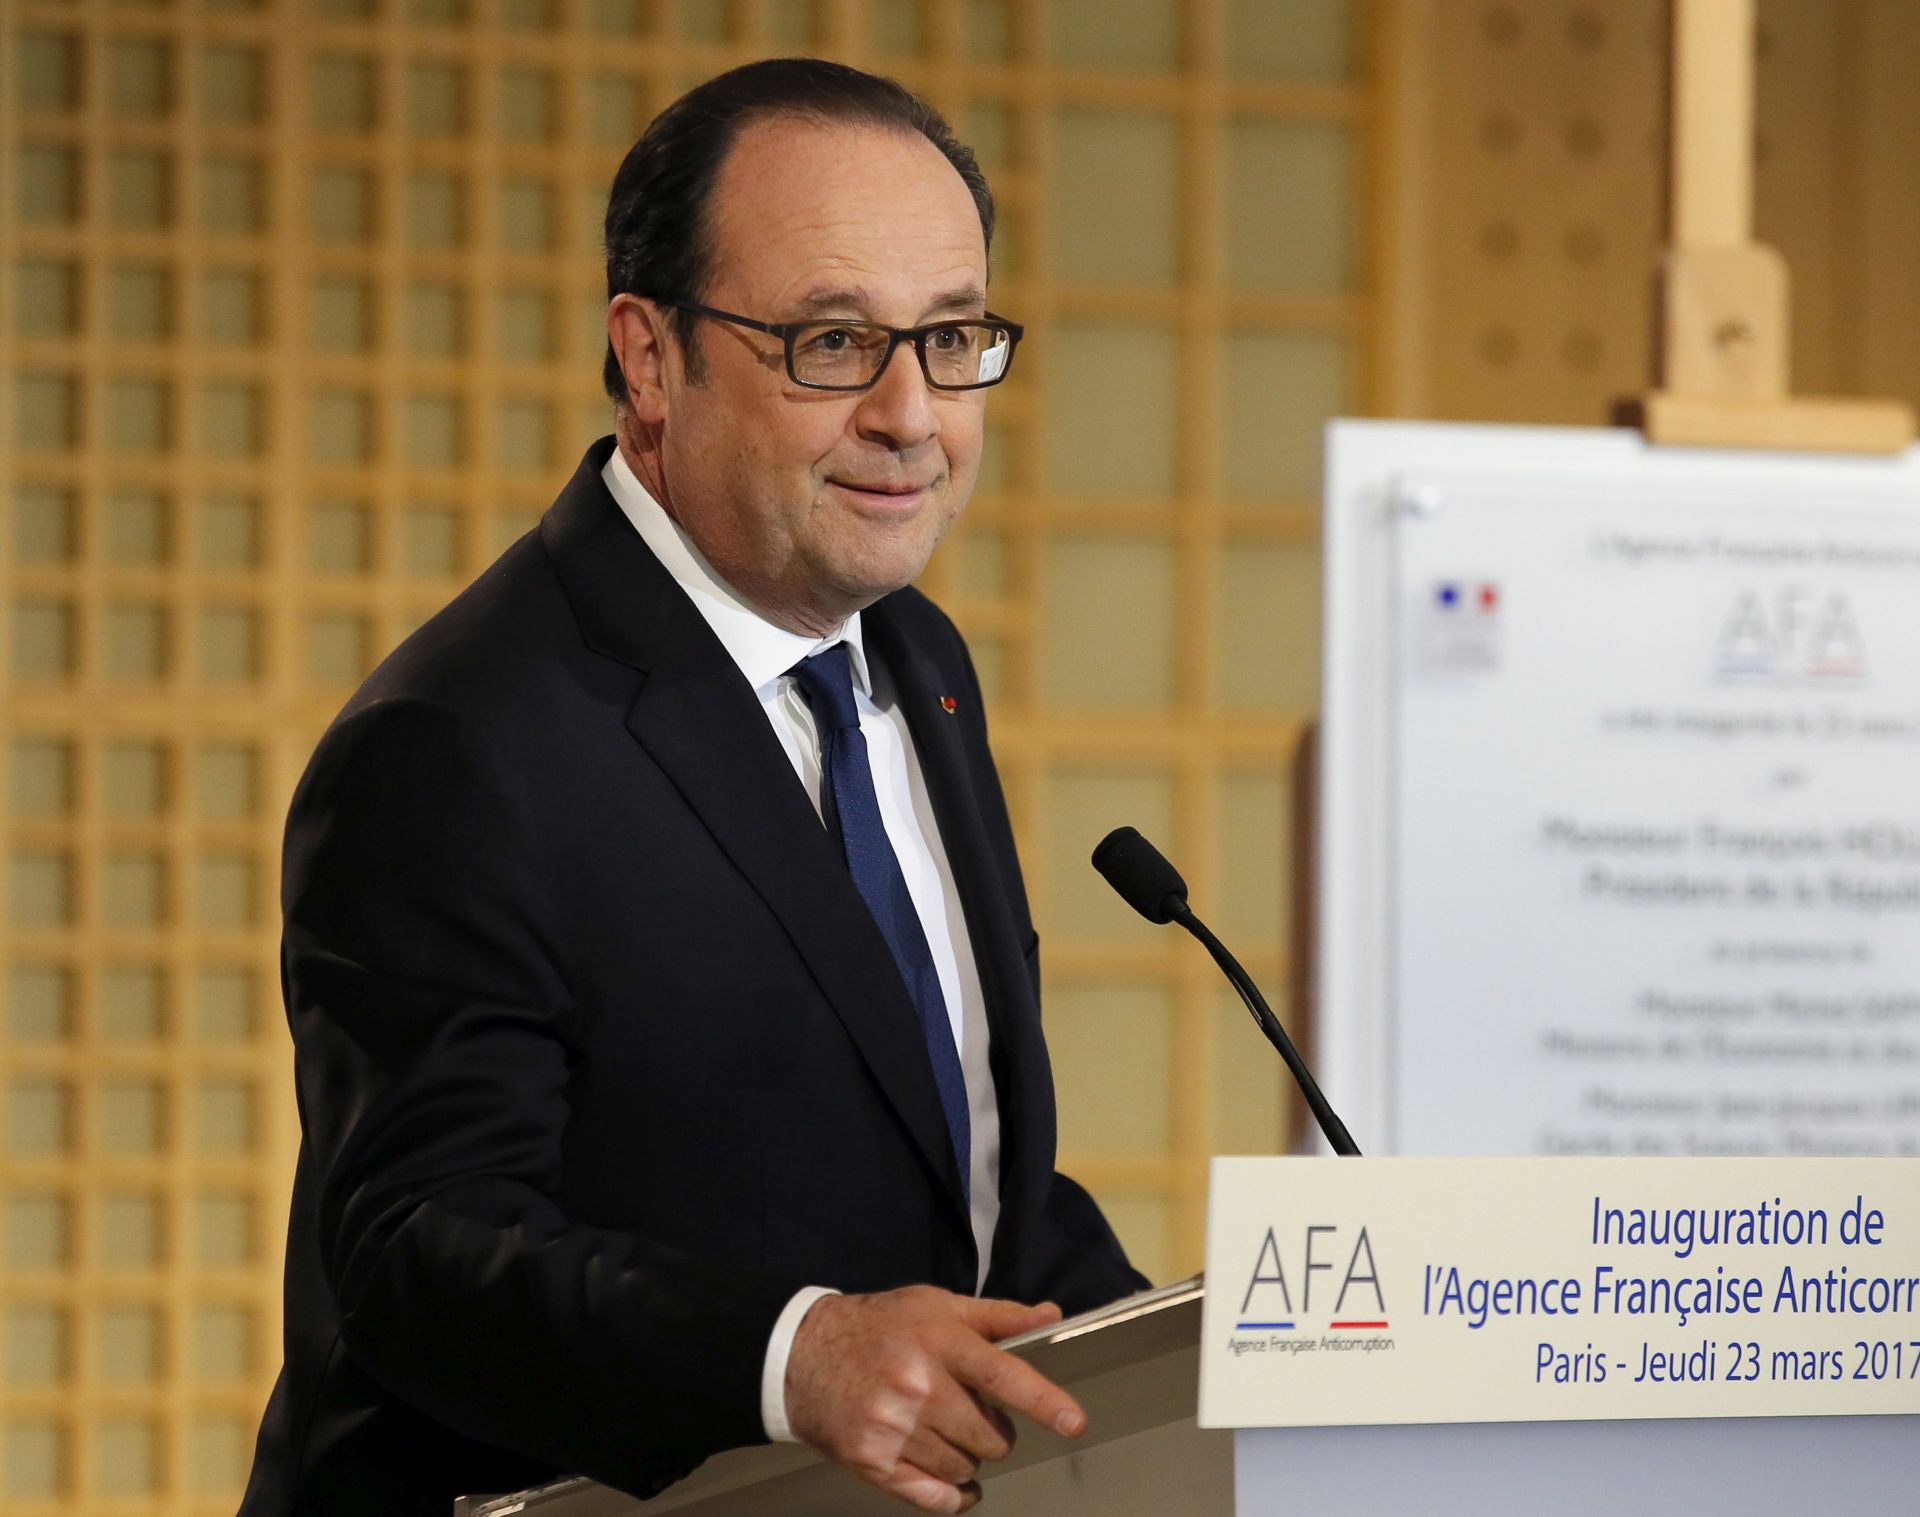 epa05865742 French president Francois Hollande delivers a speech to inaugurate the French Anti-Corruption Agency (AFA) at Bercy Economy ministry in Paris, France, 23 March 2017. The AFA is a public organization focusing on business activity, the latest move in government efforts to fight corruption.  EPA/FRANCOIS MORI / POOL